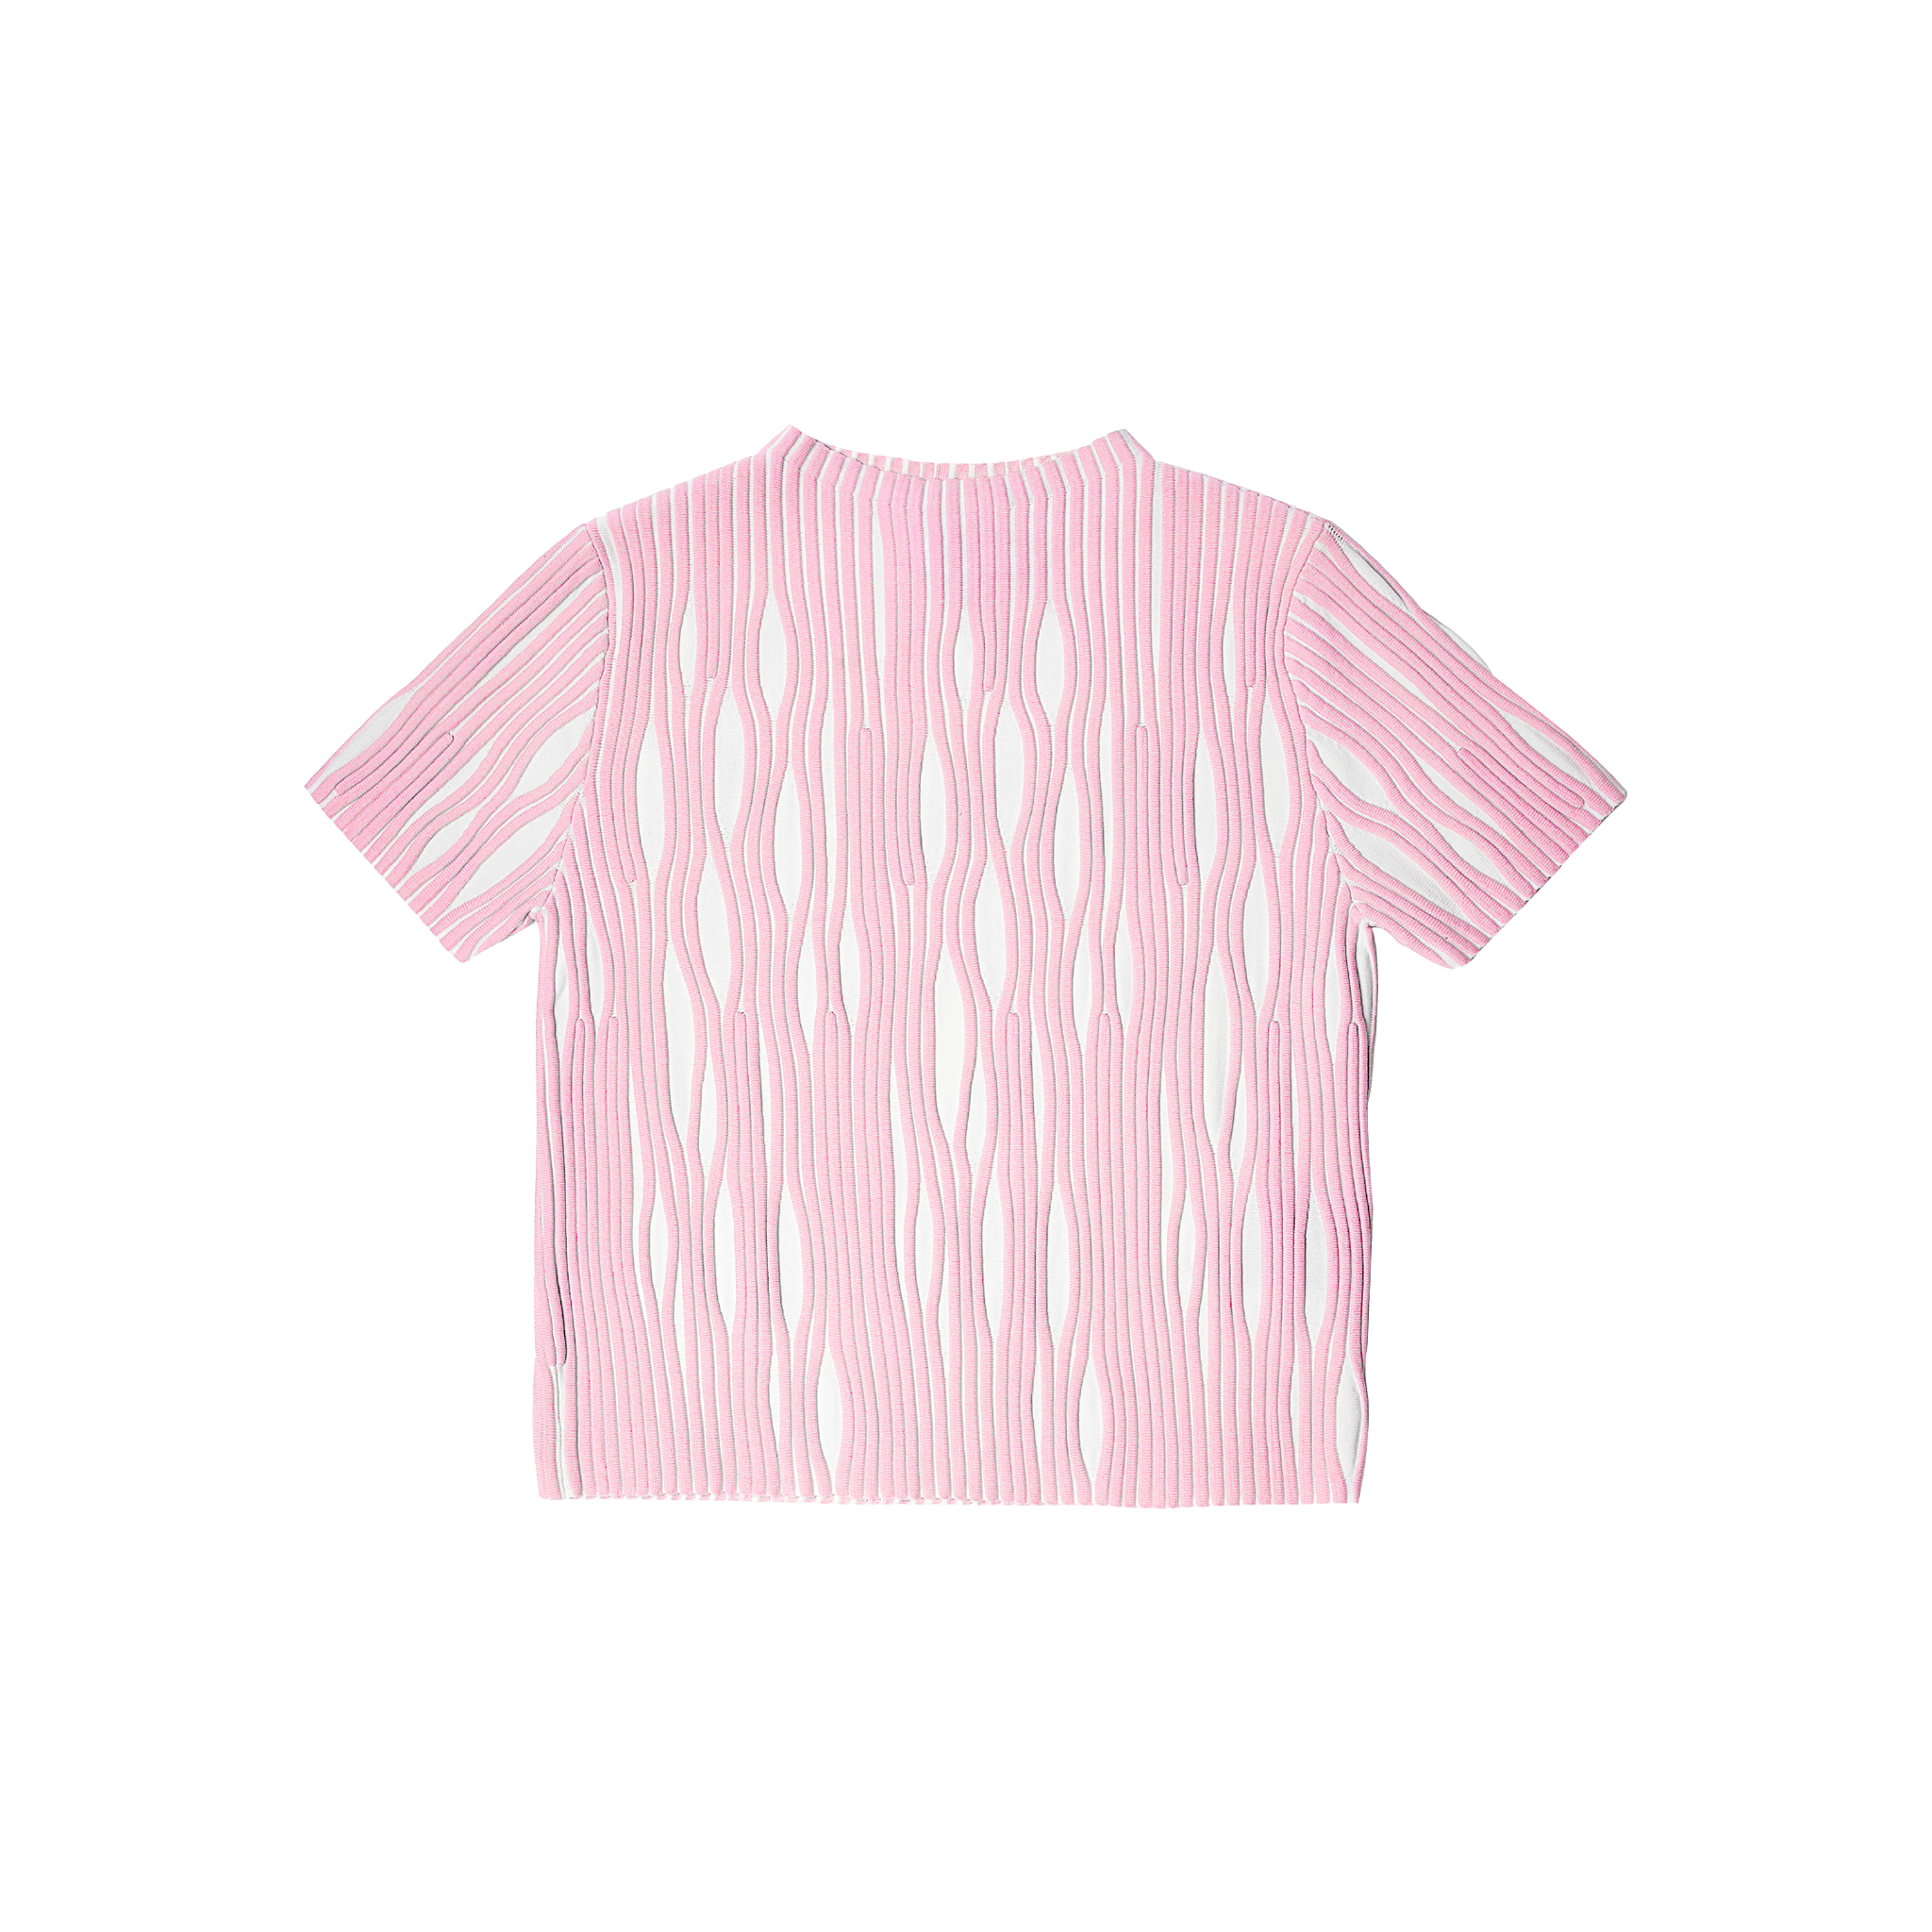 Fitted textured top - White & Pink